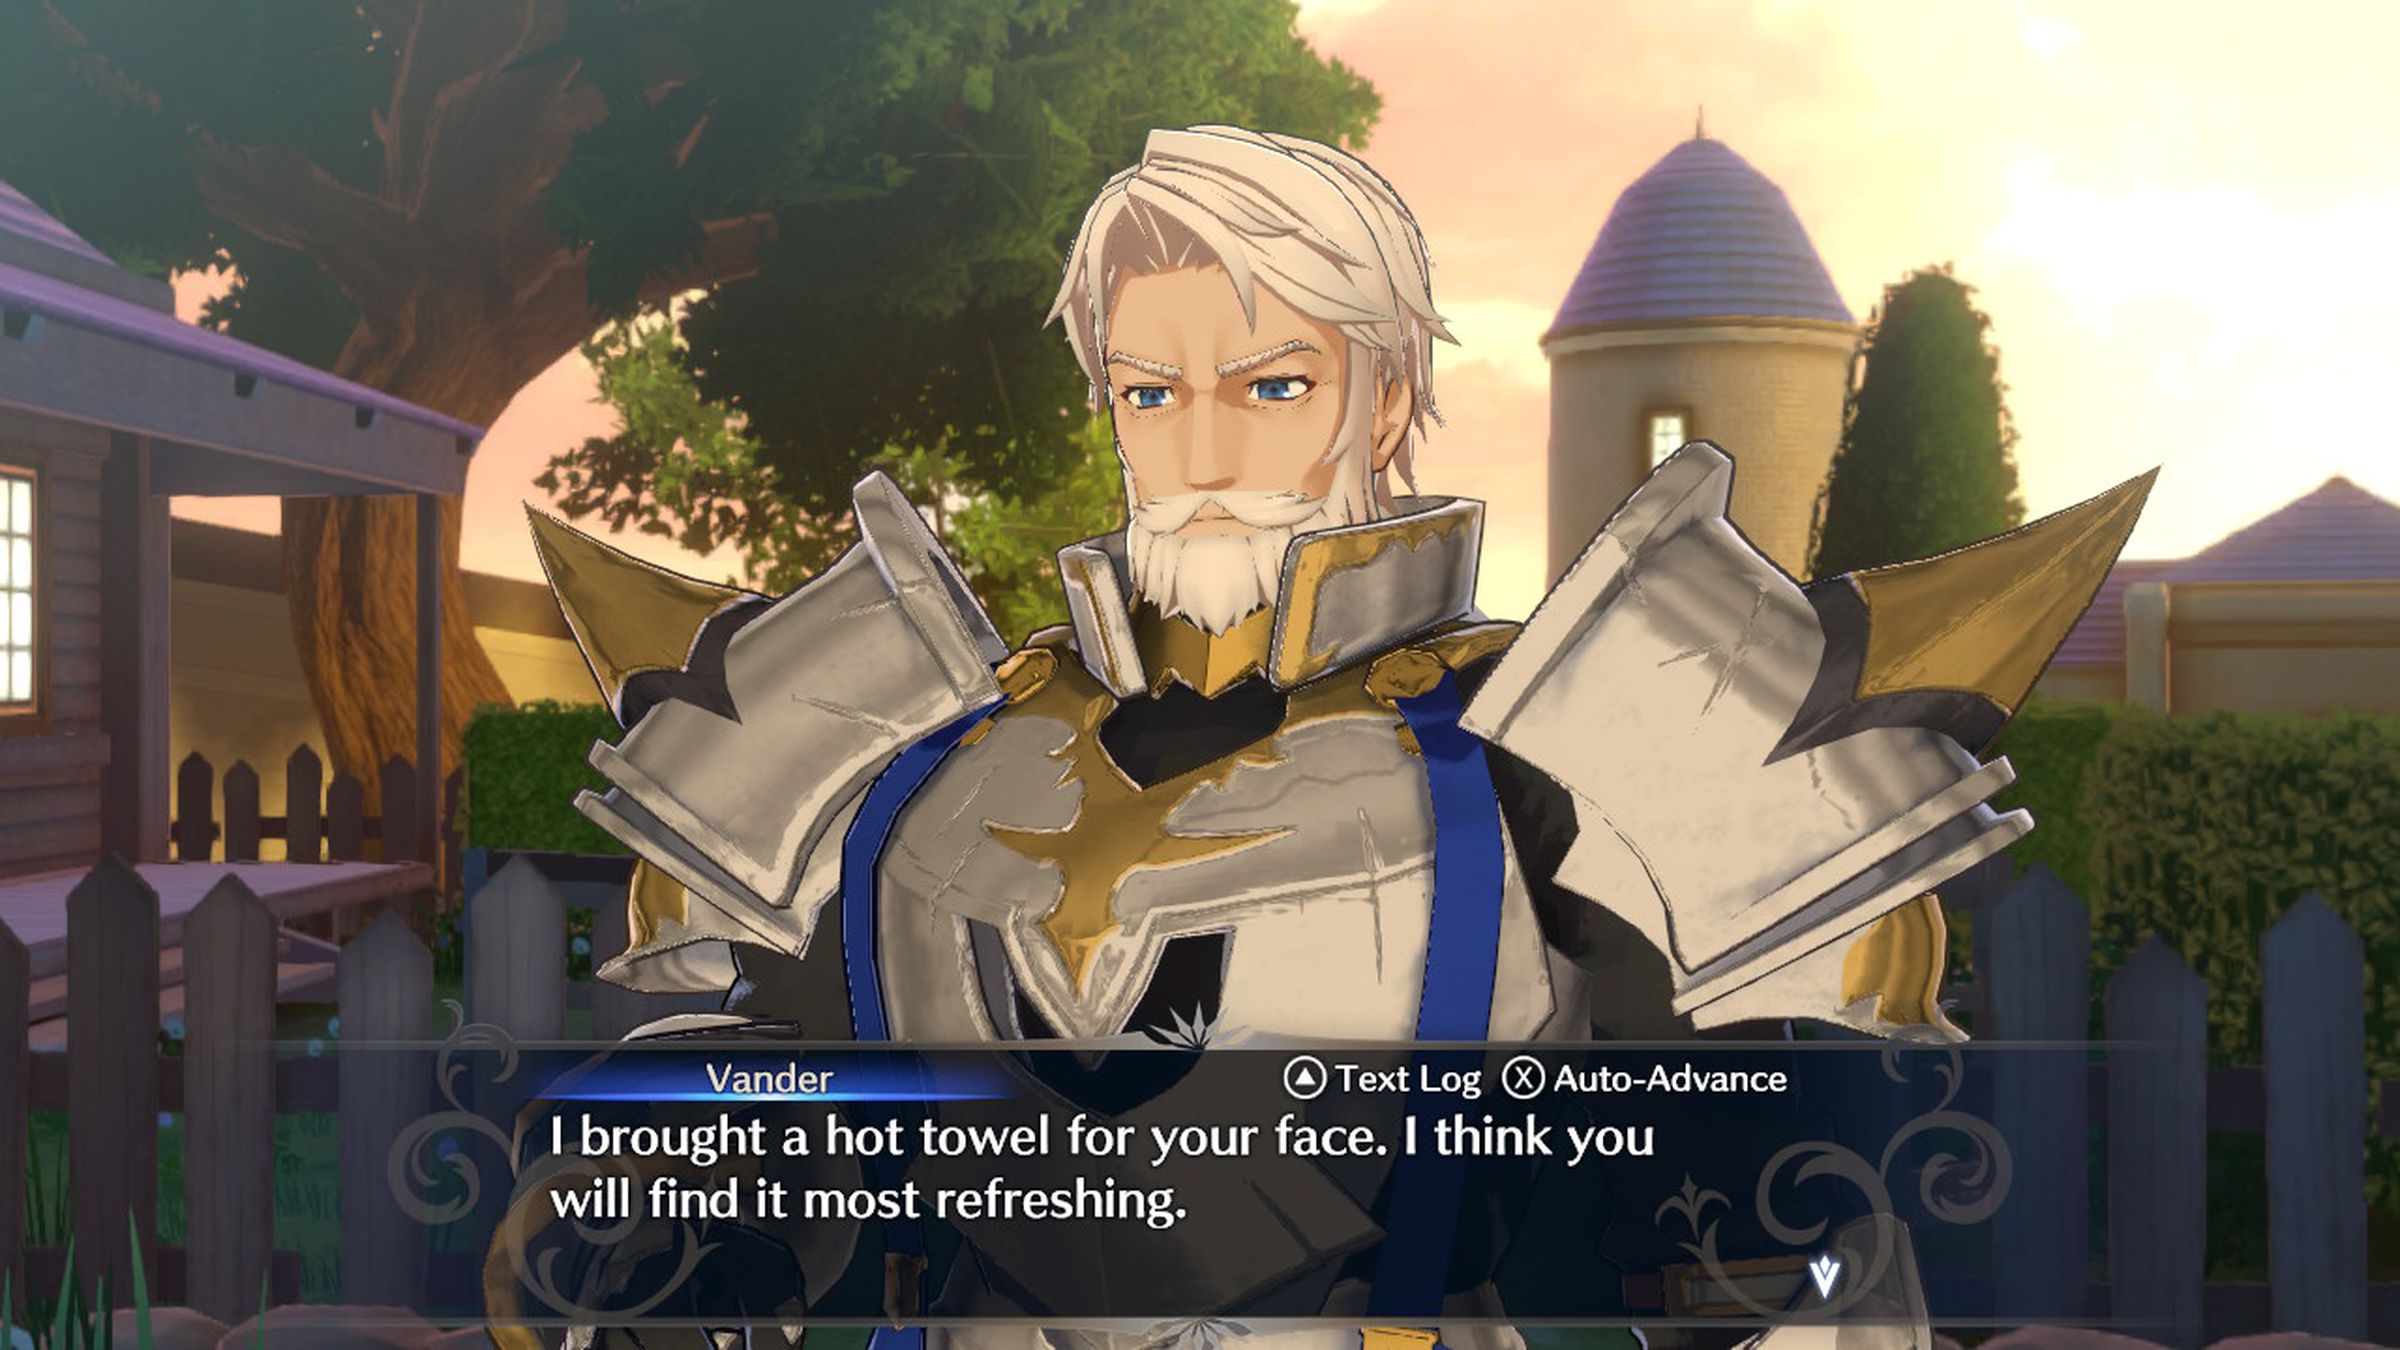 Screenshot from Fire Emblem Engage featuring the heavily armored character Vander speaking to the main character Alear